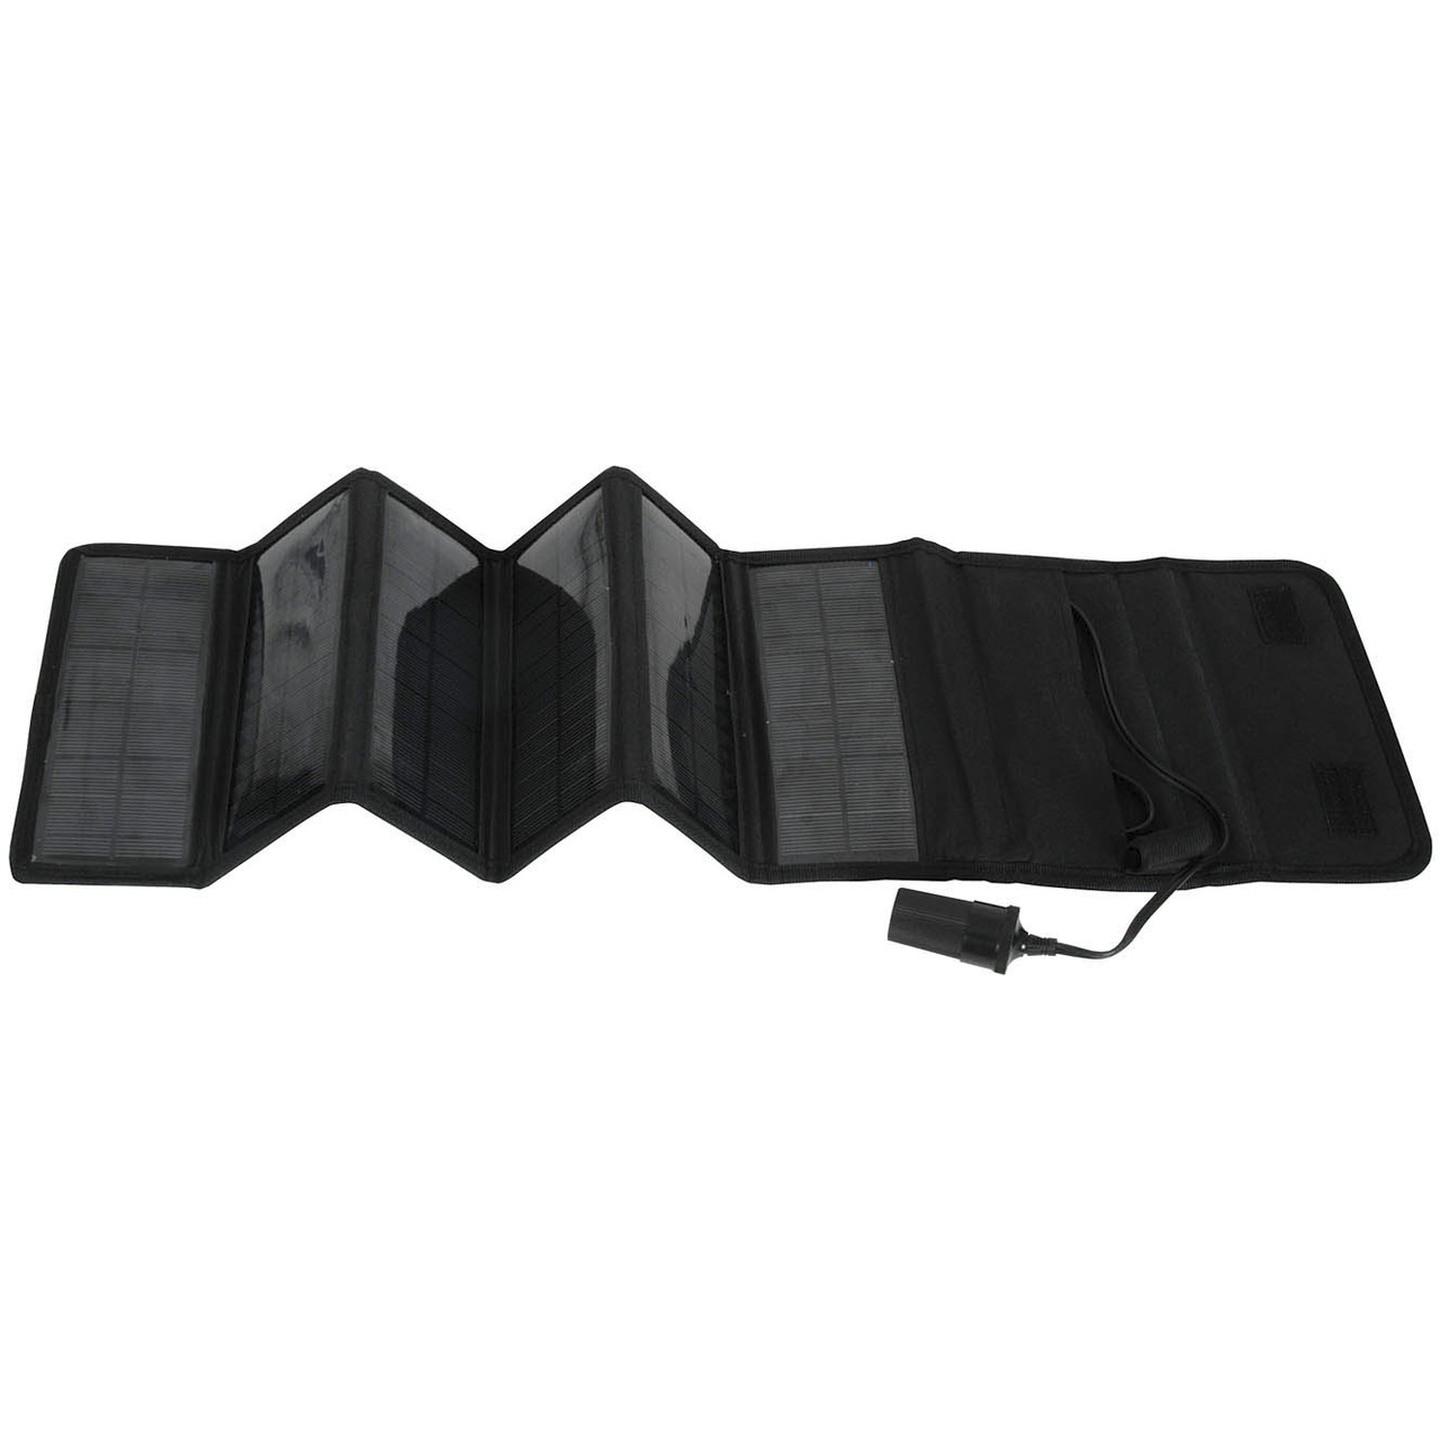 Folding Solar Charger - 10W